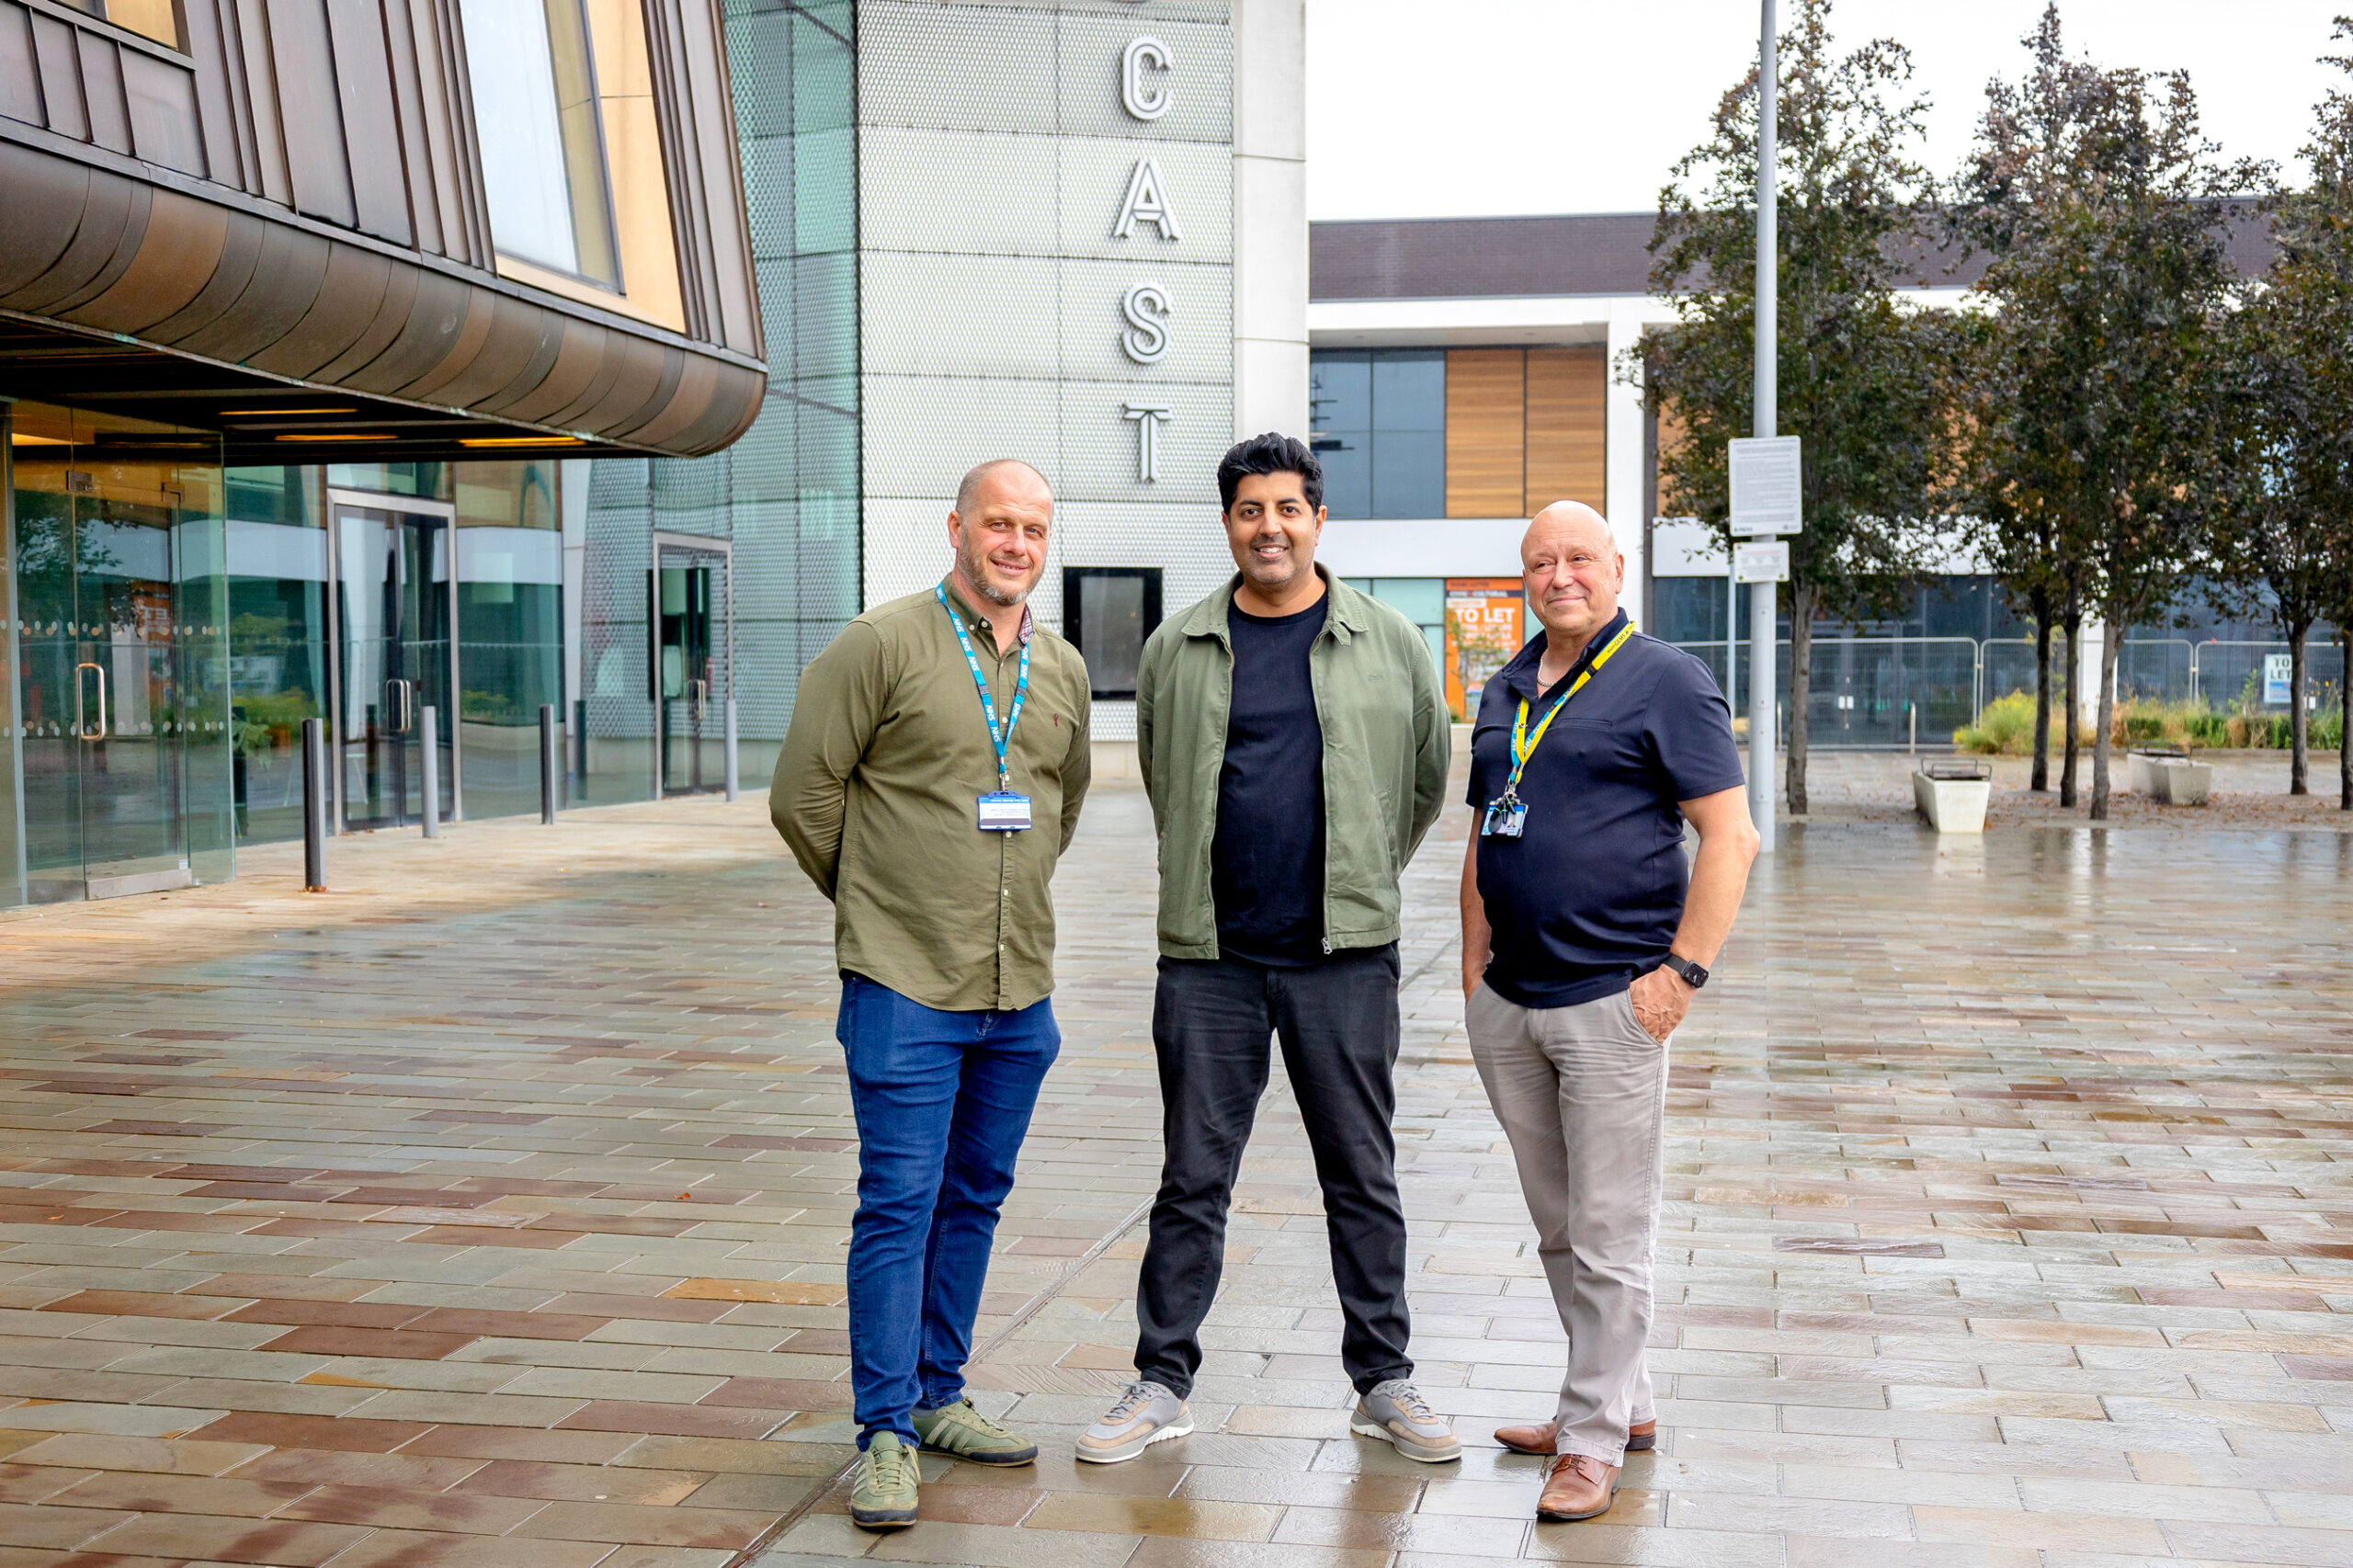 Pictured left to right: Stuart Green, Aspire Service Manager; Rajnish Madaan, Film Maker; and Neil Firbank, Senior Group Work Practitioner at Aspire.